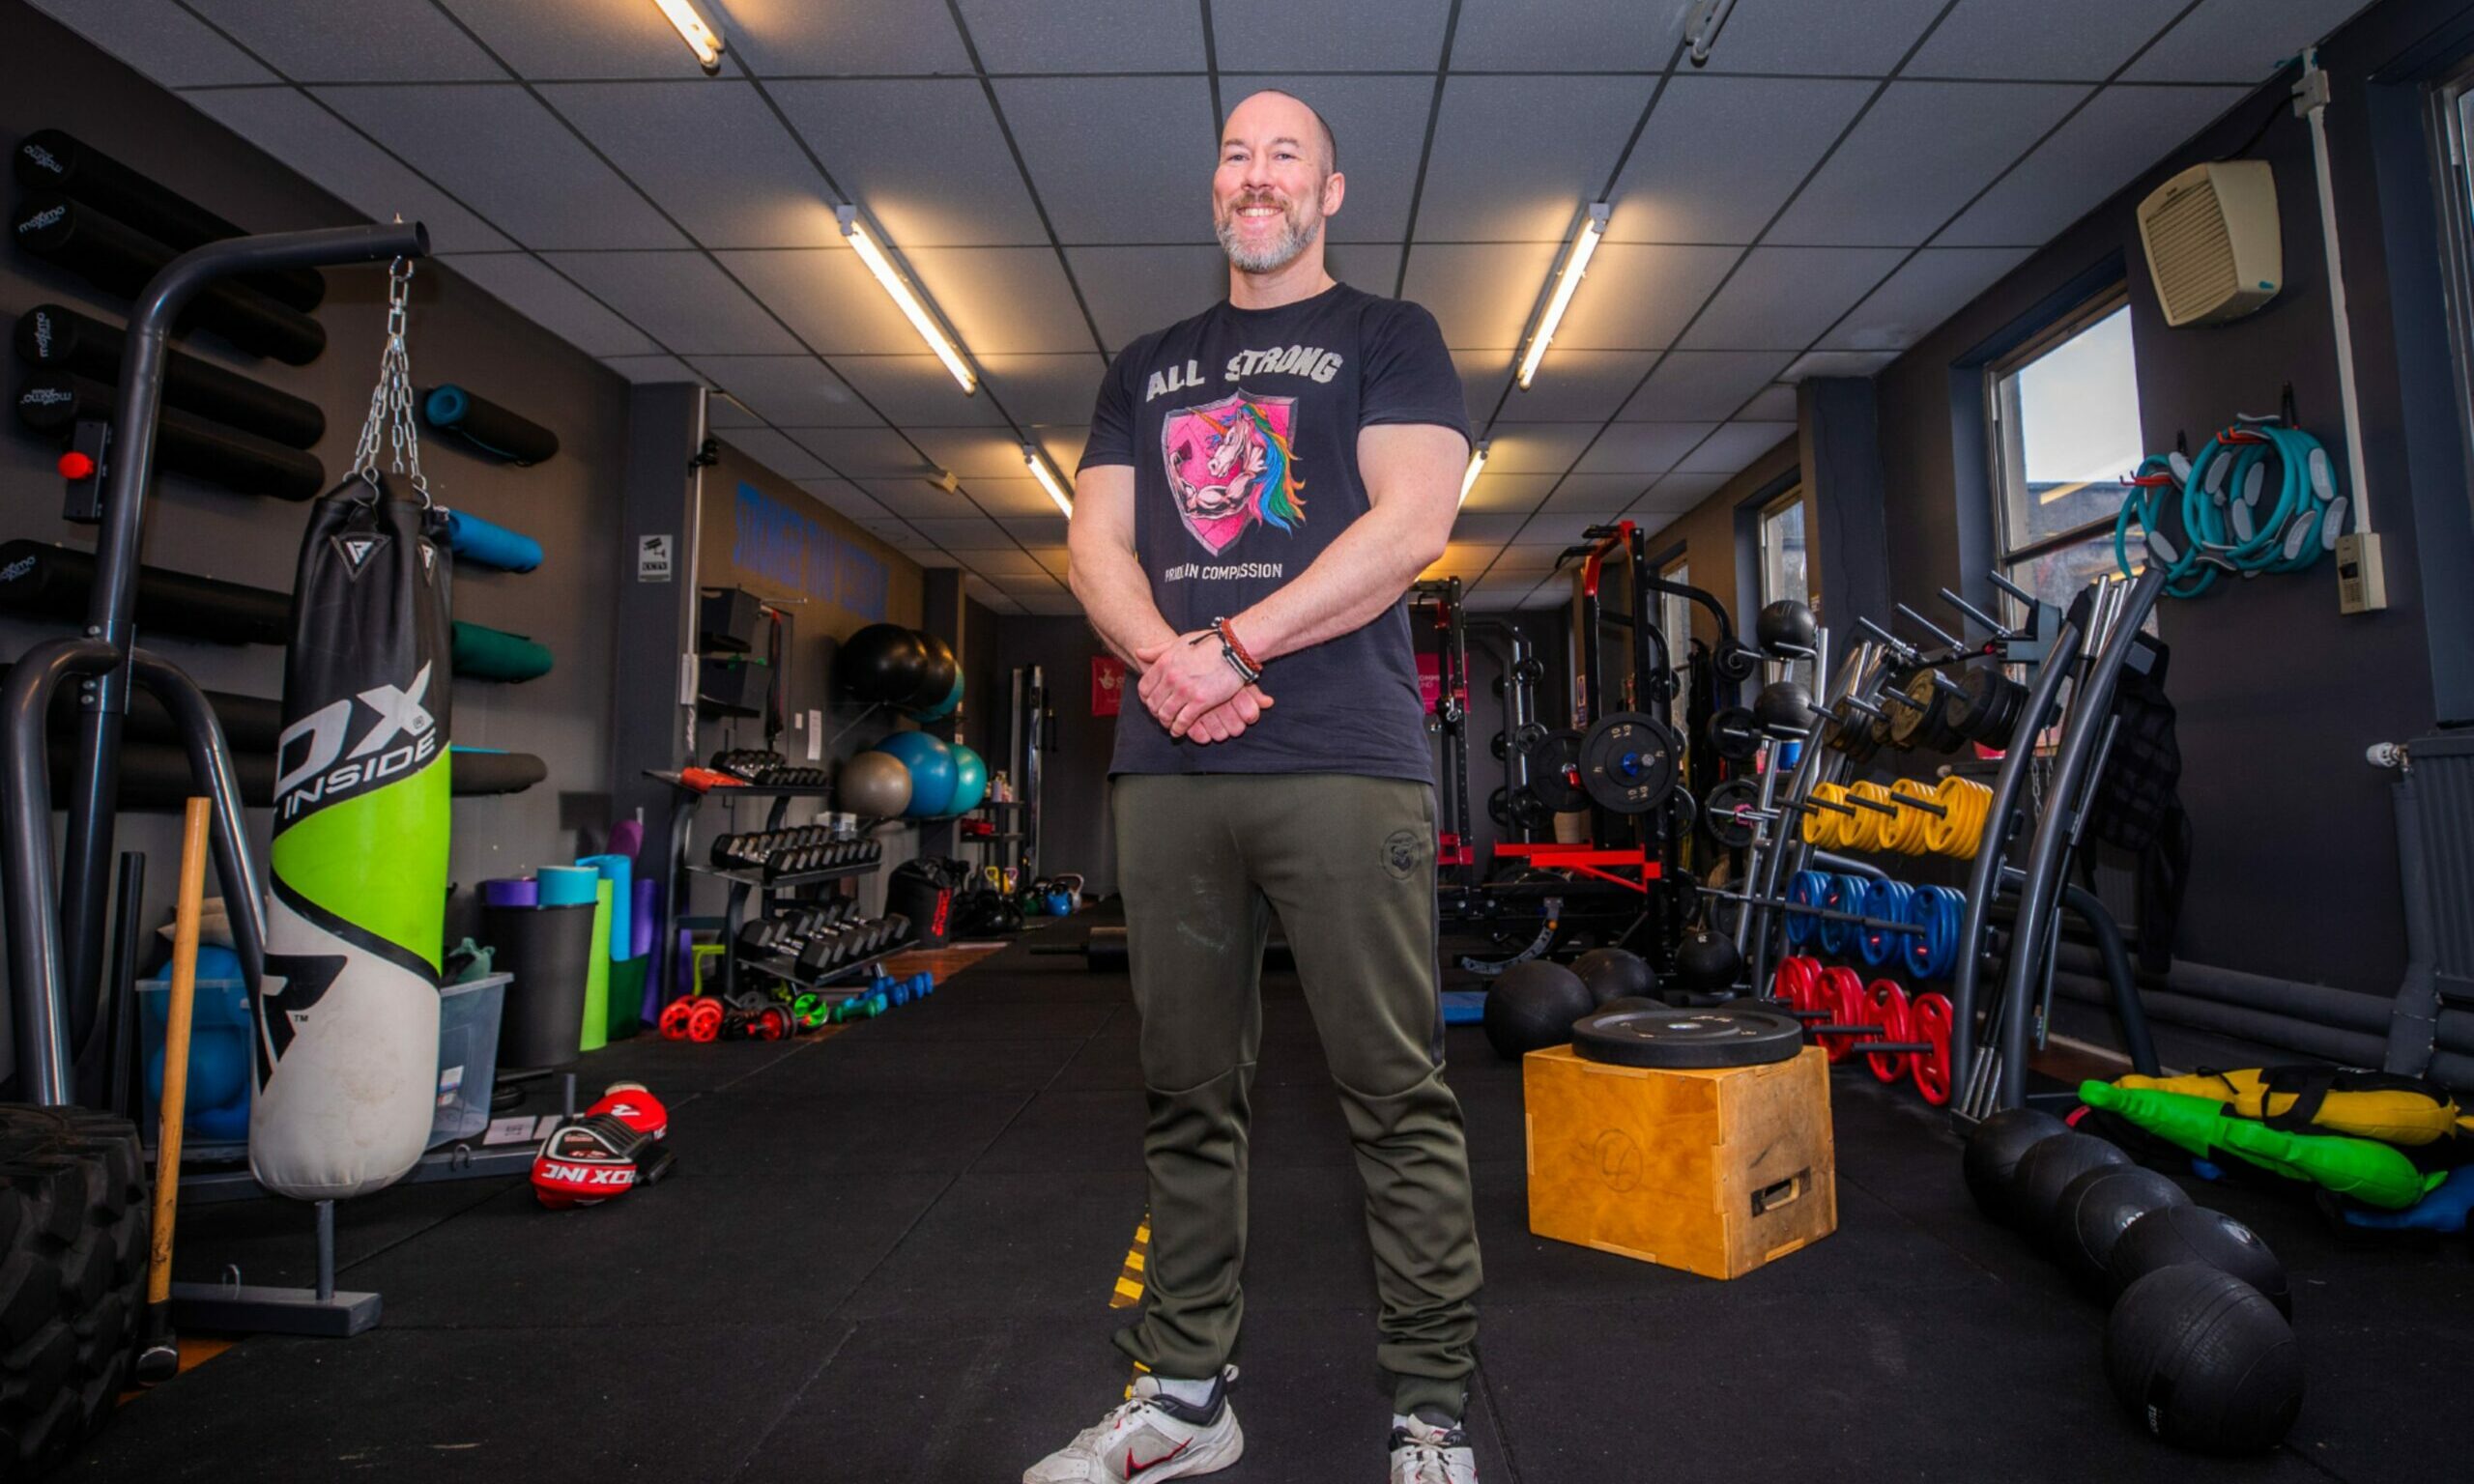 Scotland All-Strong: The Perth gym putting mental health first